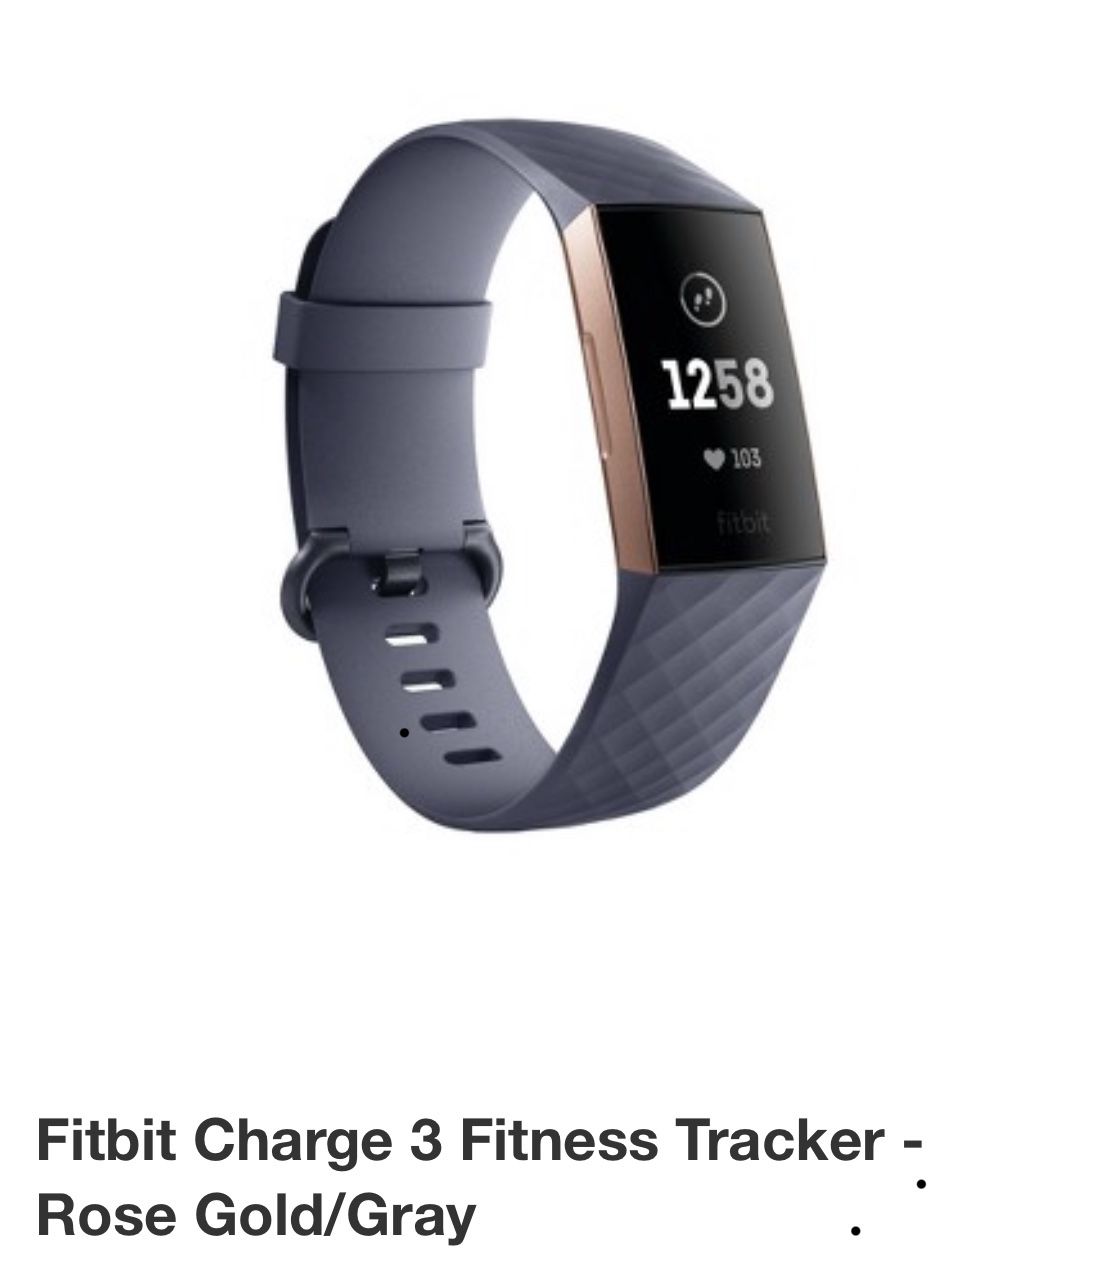 Fitbit charge 3 fitness tracker - Brand New in sealed box